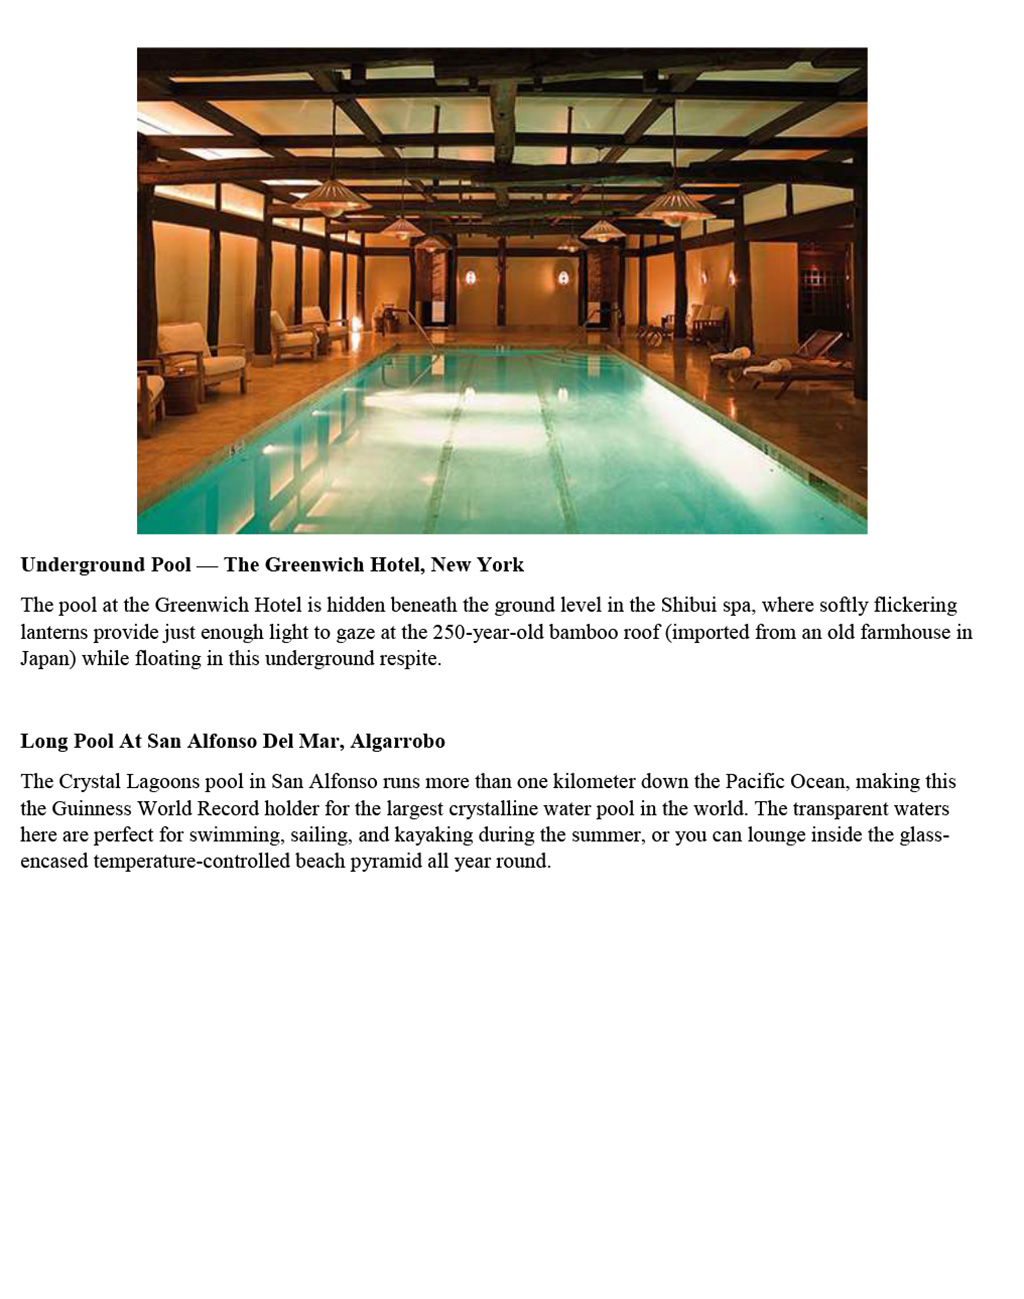 Refinery 29 includes Underground Pool at The Greenwich Hotel in in New York City its list of The 13 Most Insanely Gorgeous Pools in the World